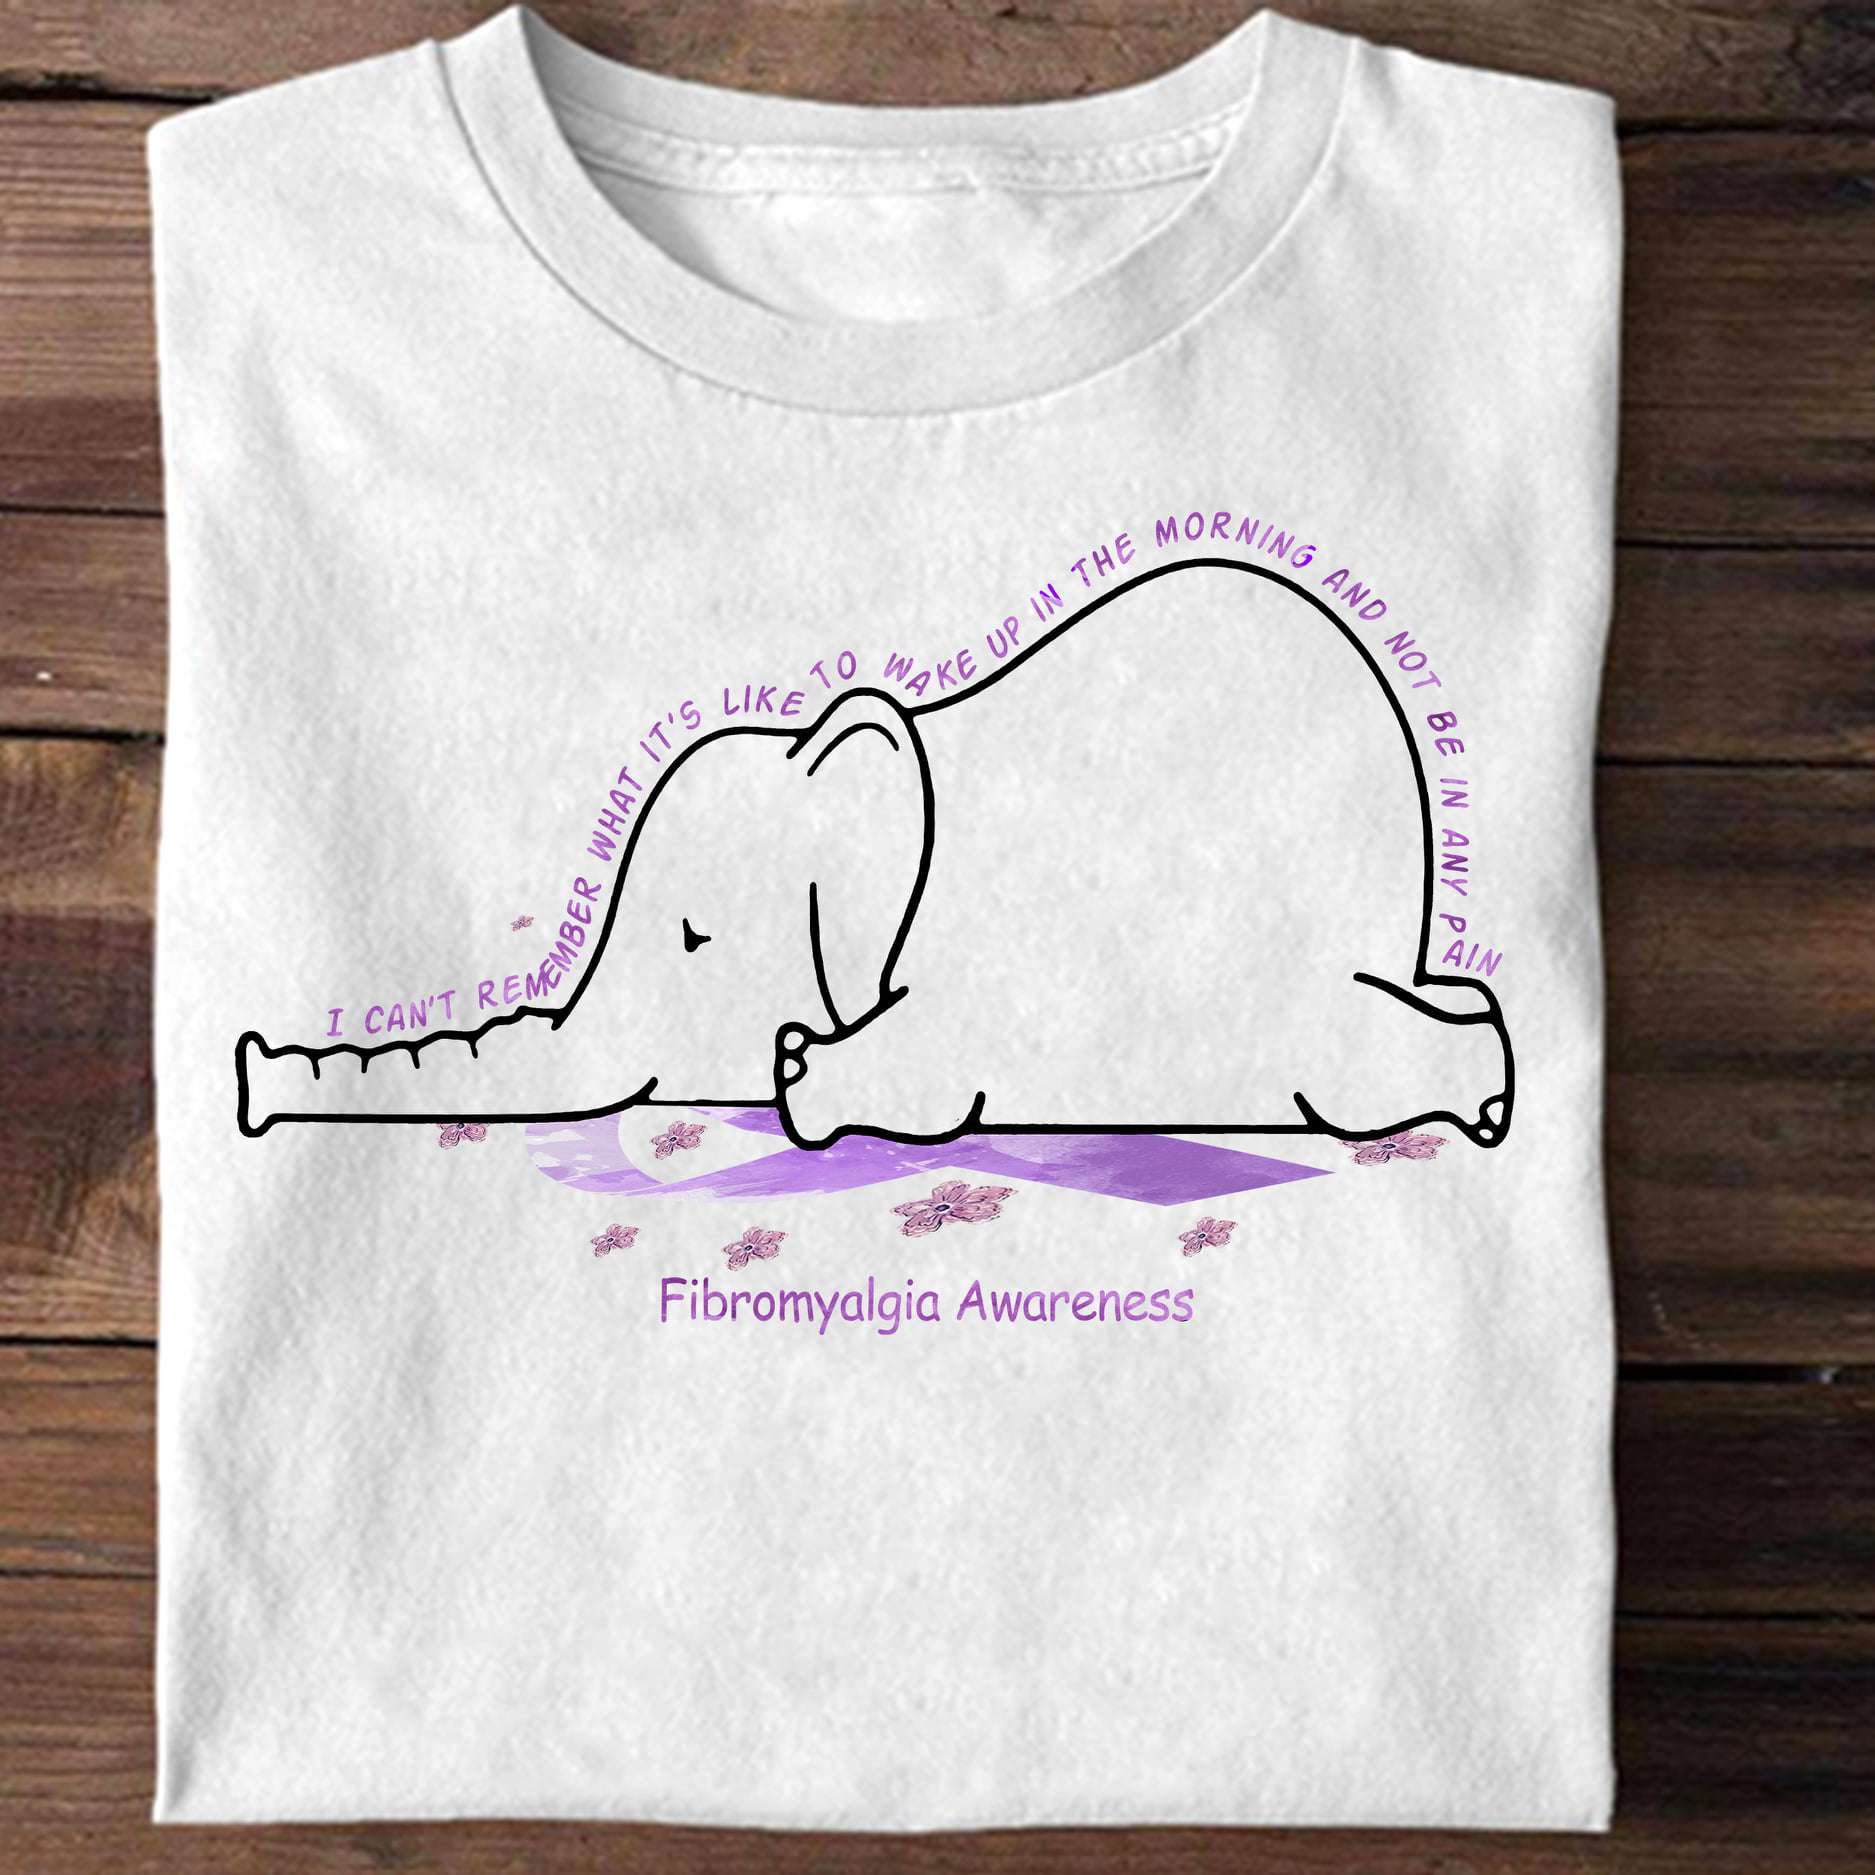 I can't remember what it's like to make up in the morning and not be in any pain - Fibromyalgia awareness, fibro elephants